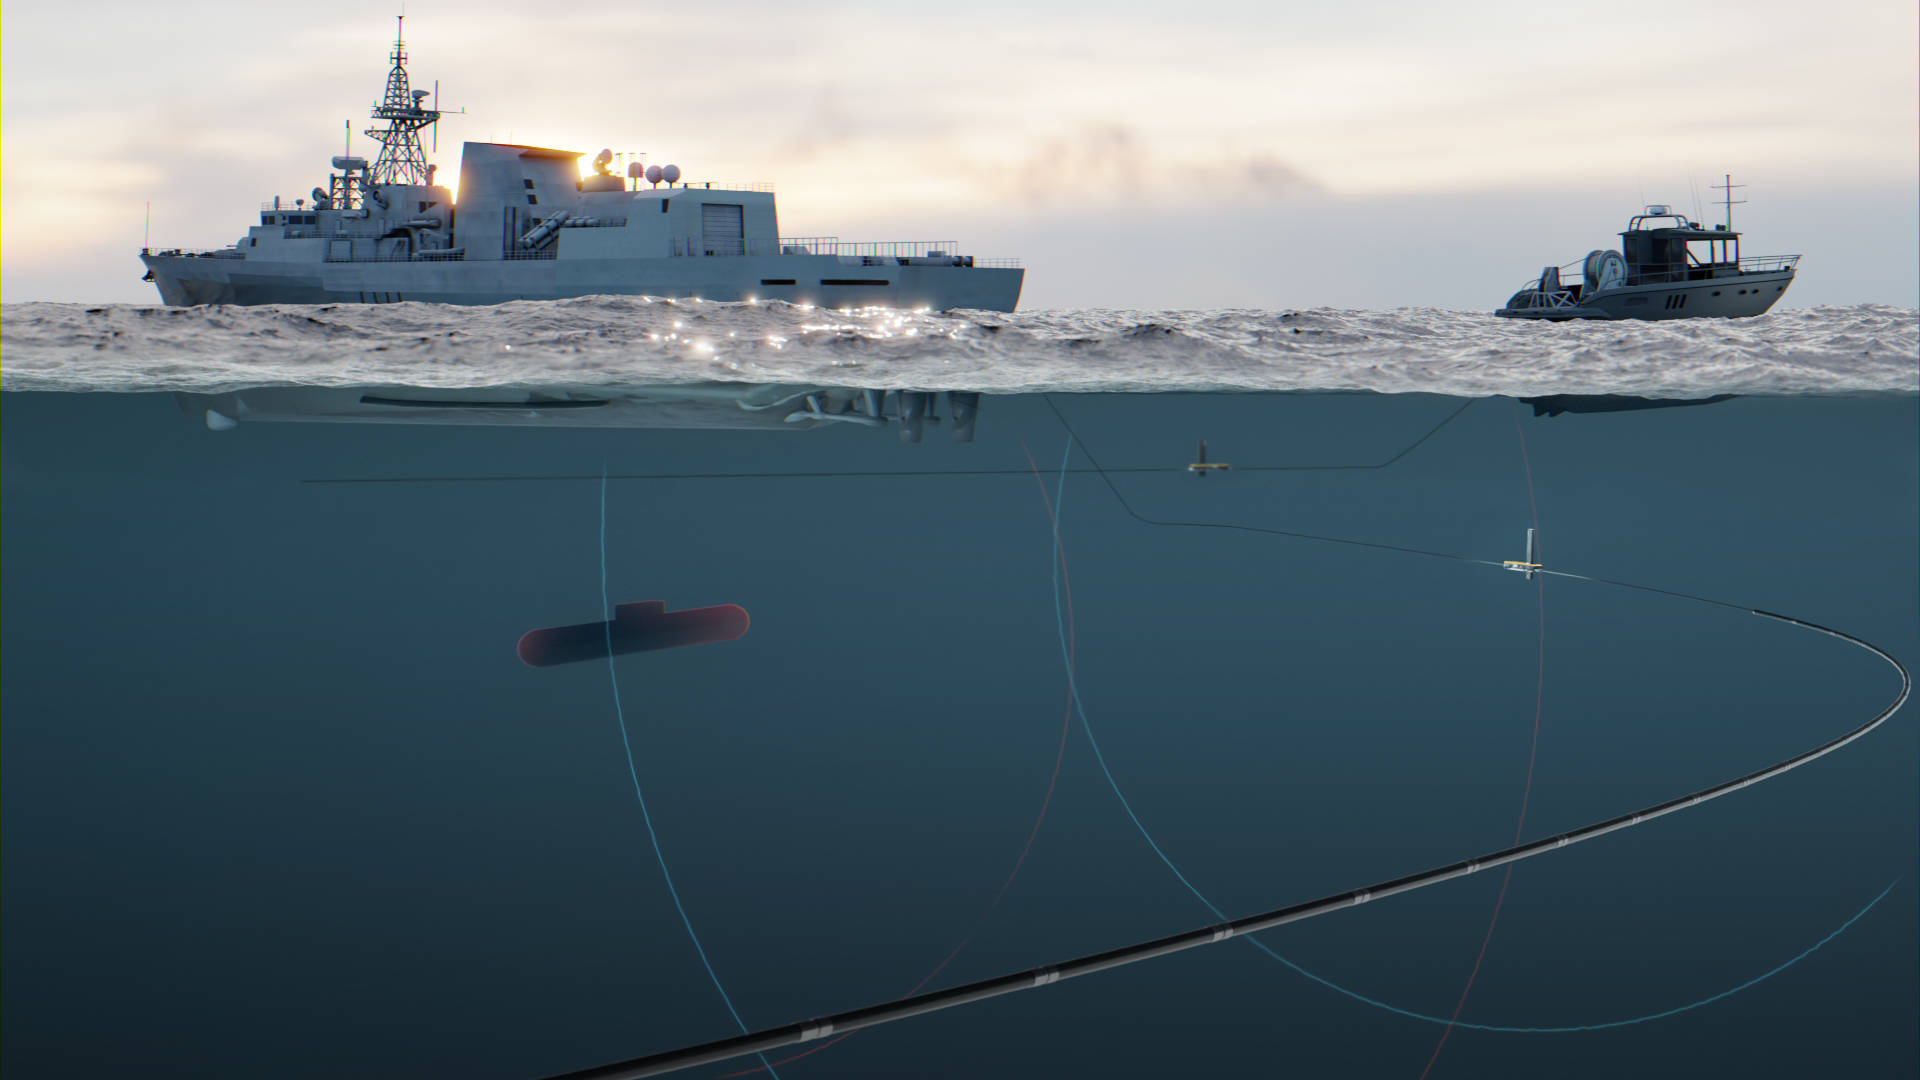 a stationary research ship uses sonar